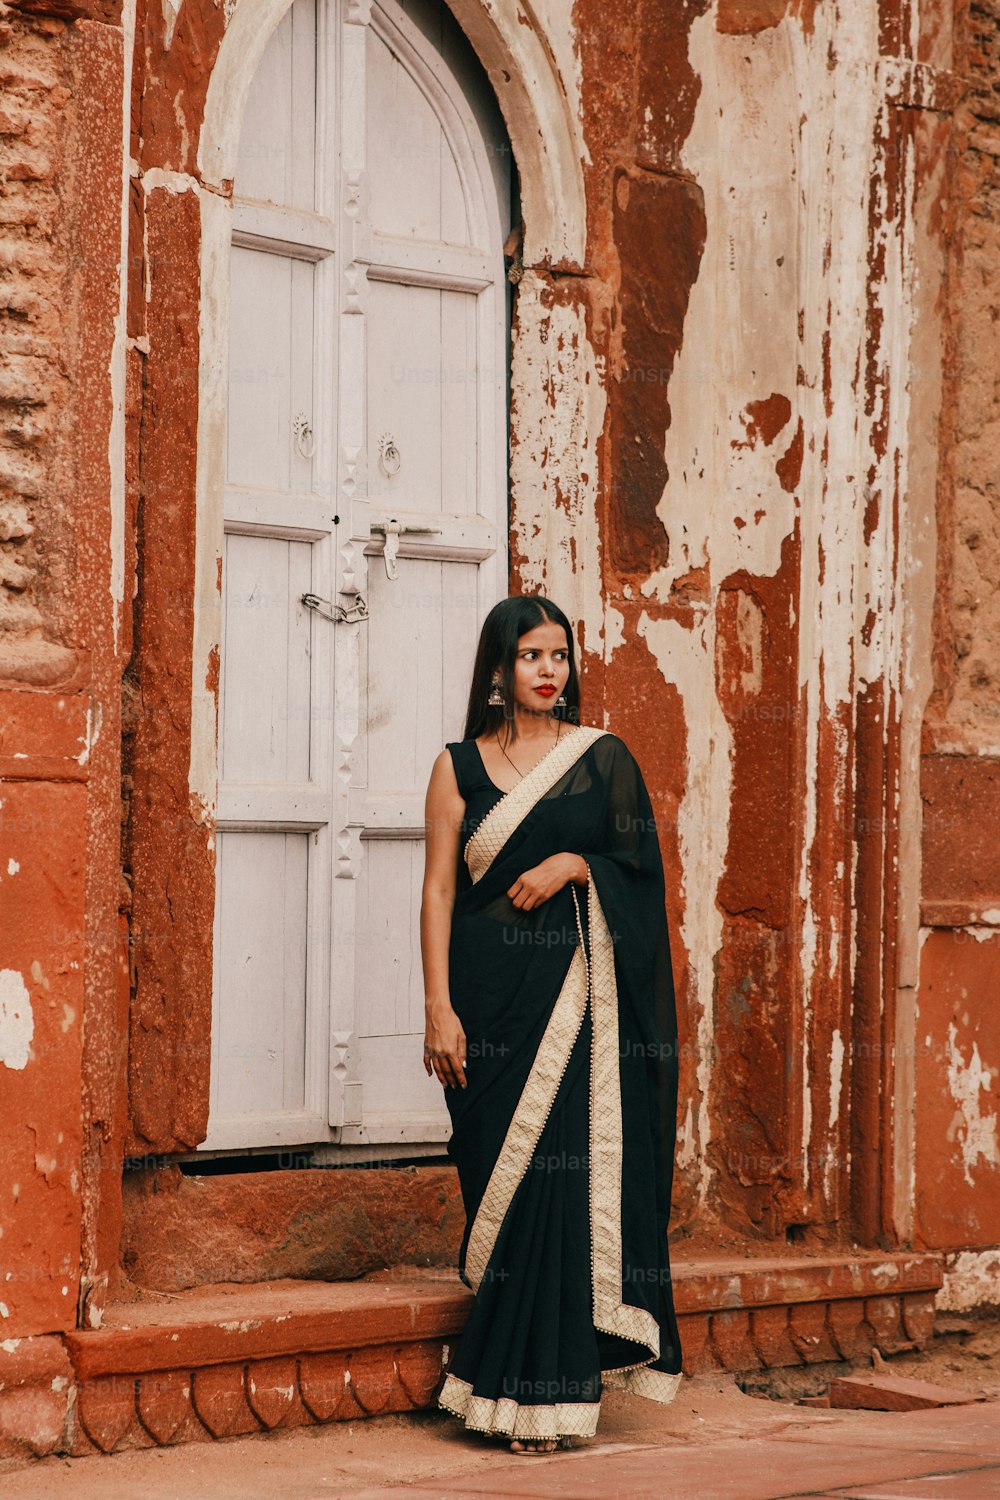 a woman in a black and white sari standing in front of a door